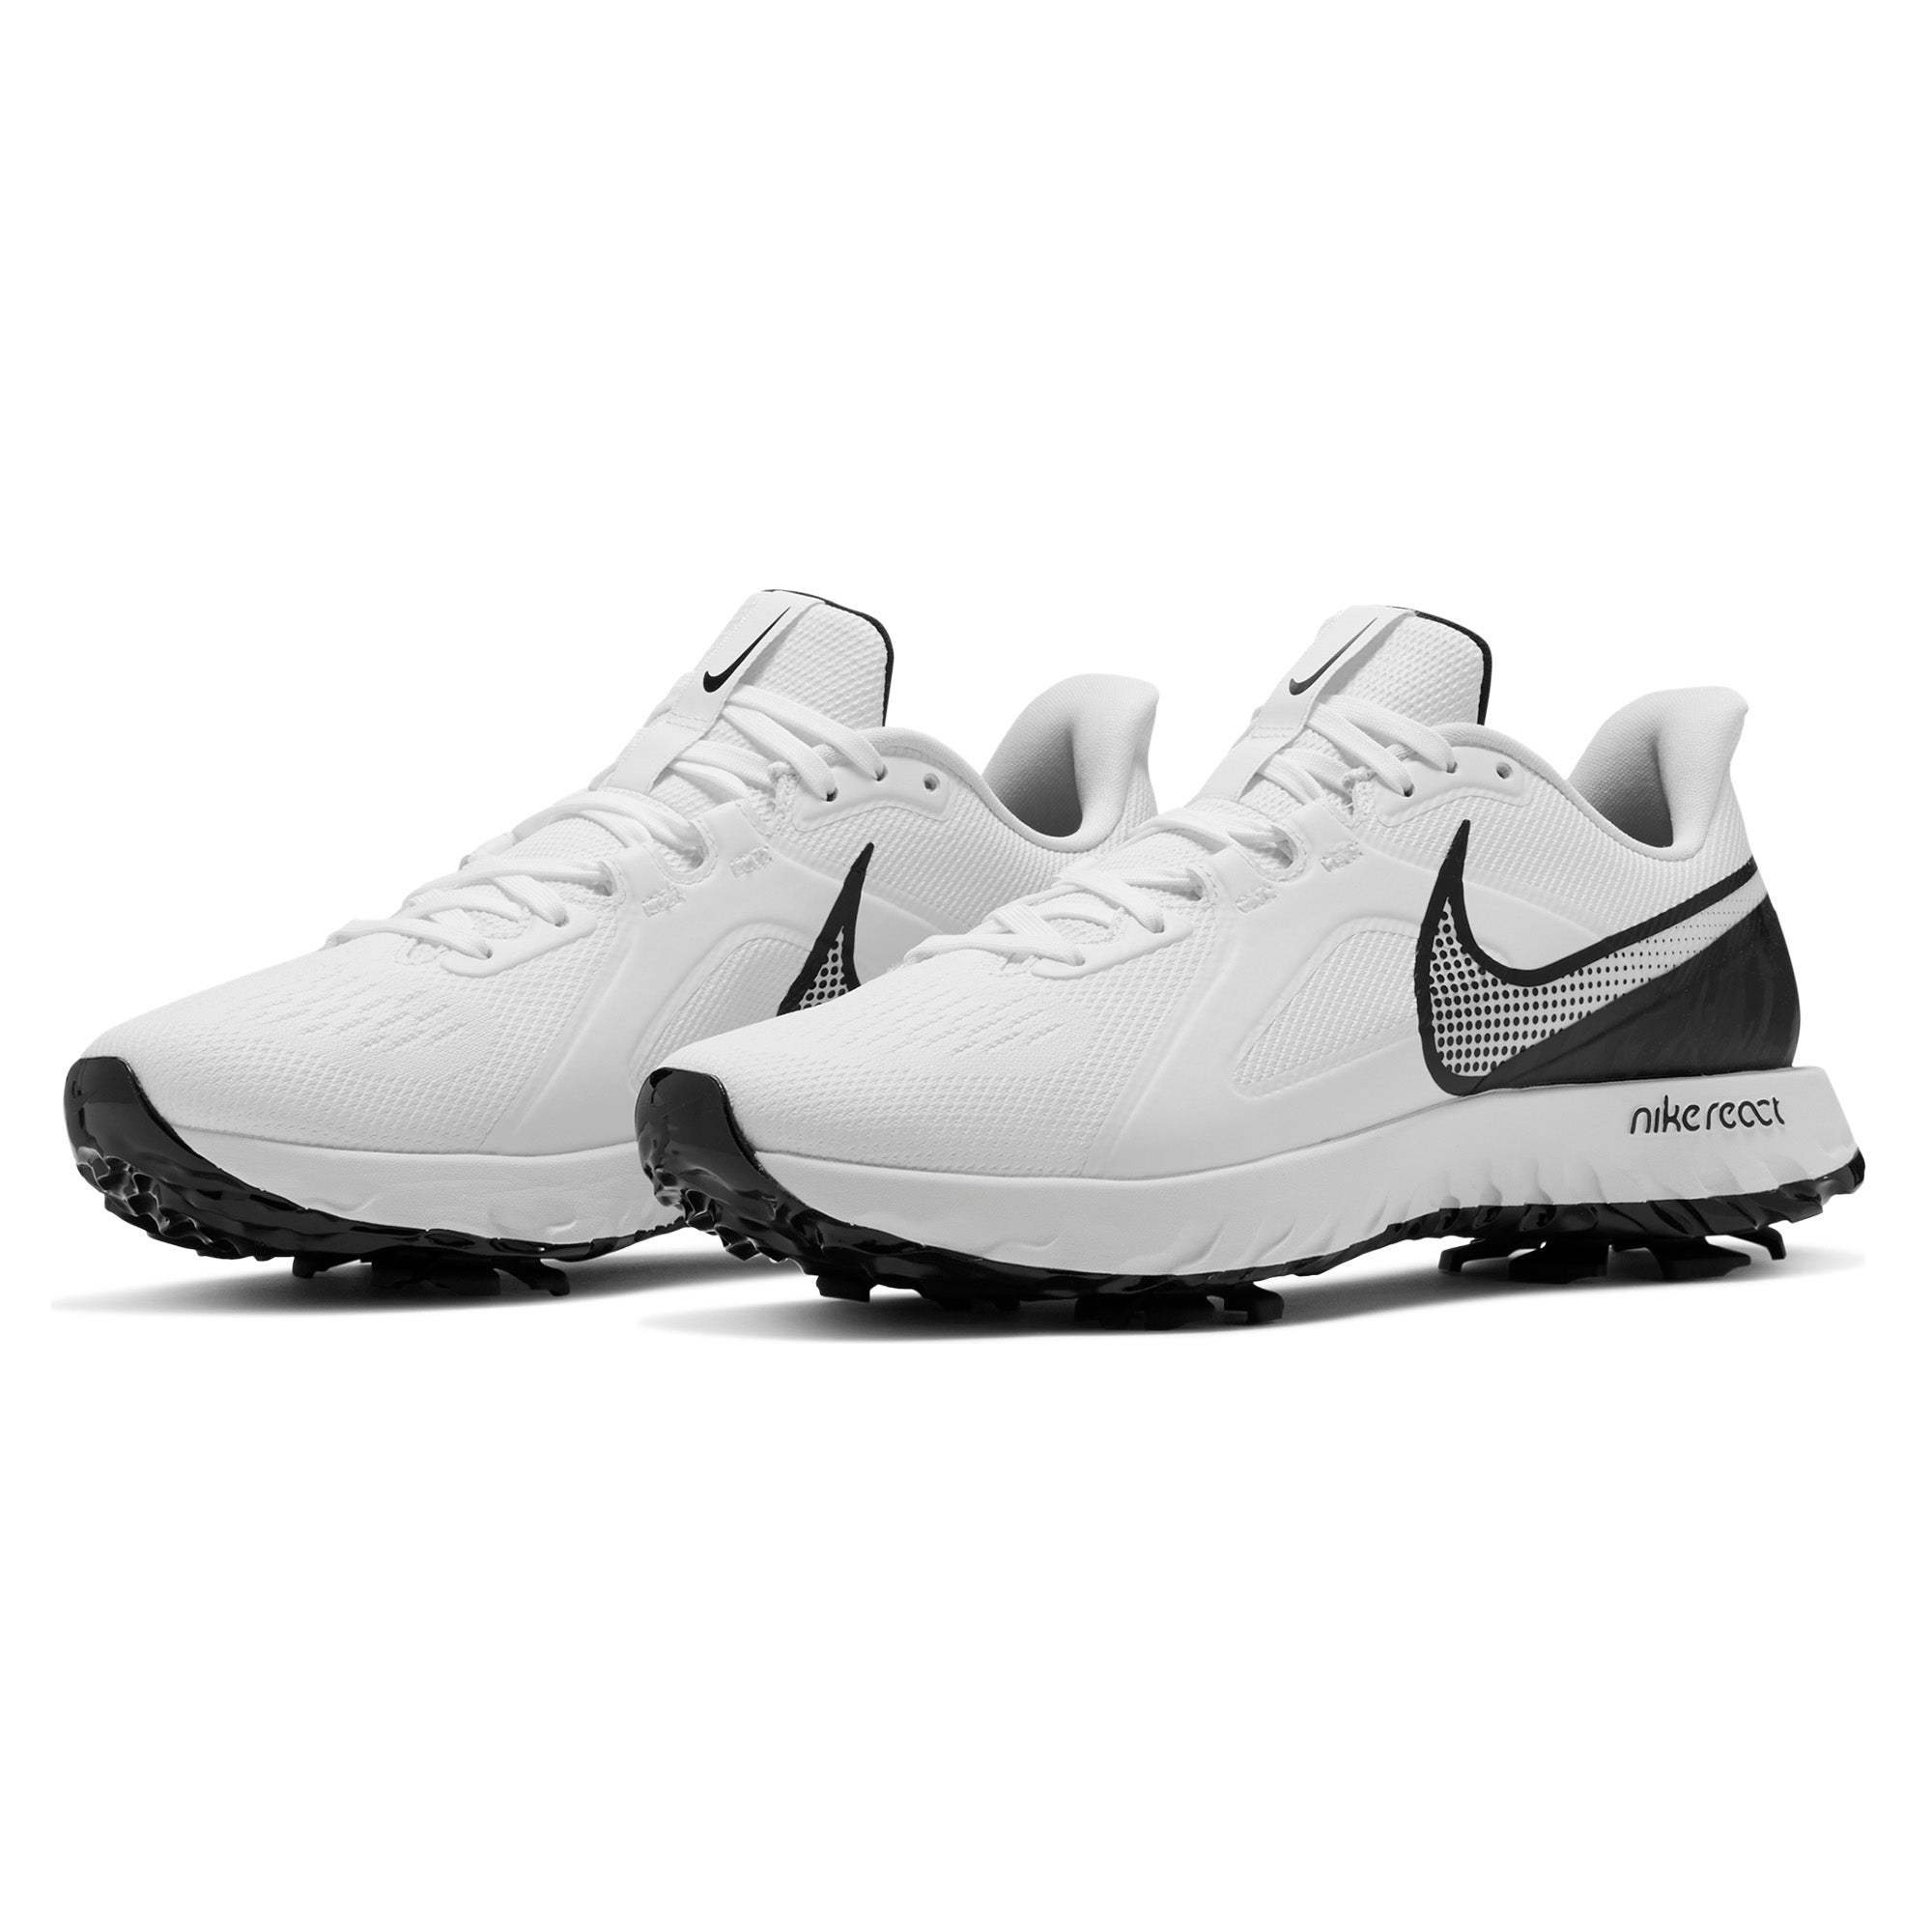 Nike Golf React Infinity Pro Shoes CT6620 White Black 102 | Function18